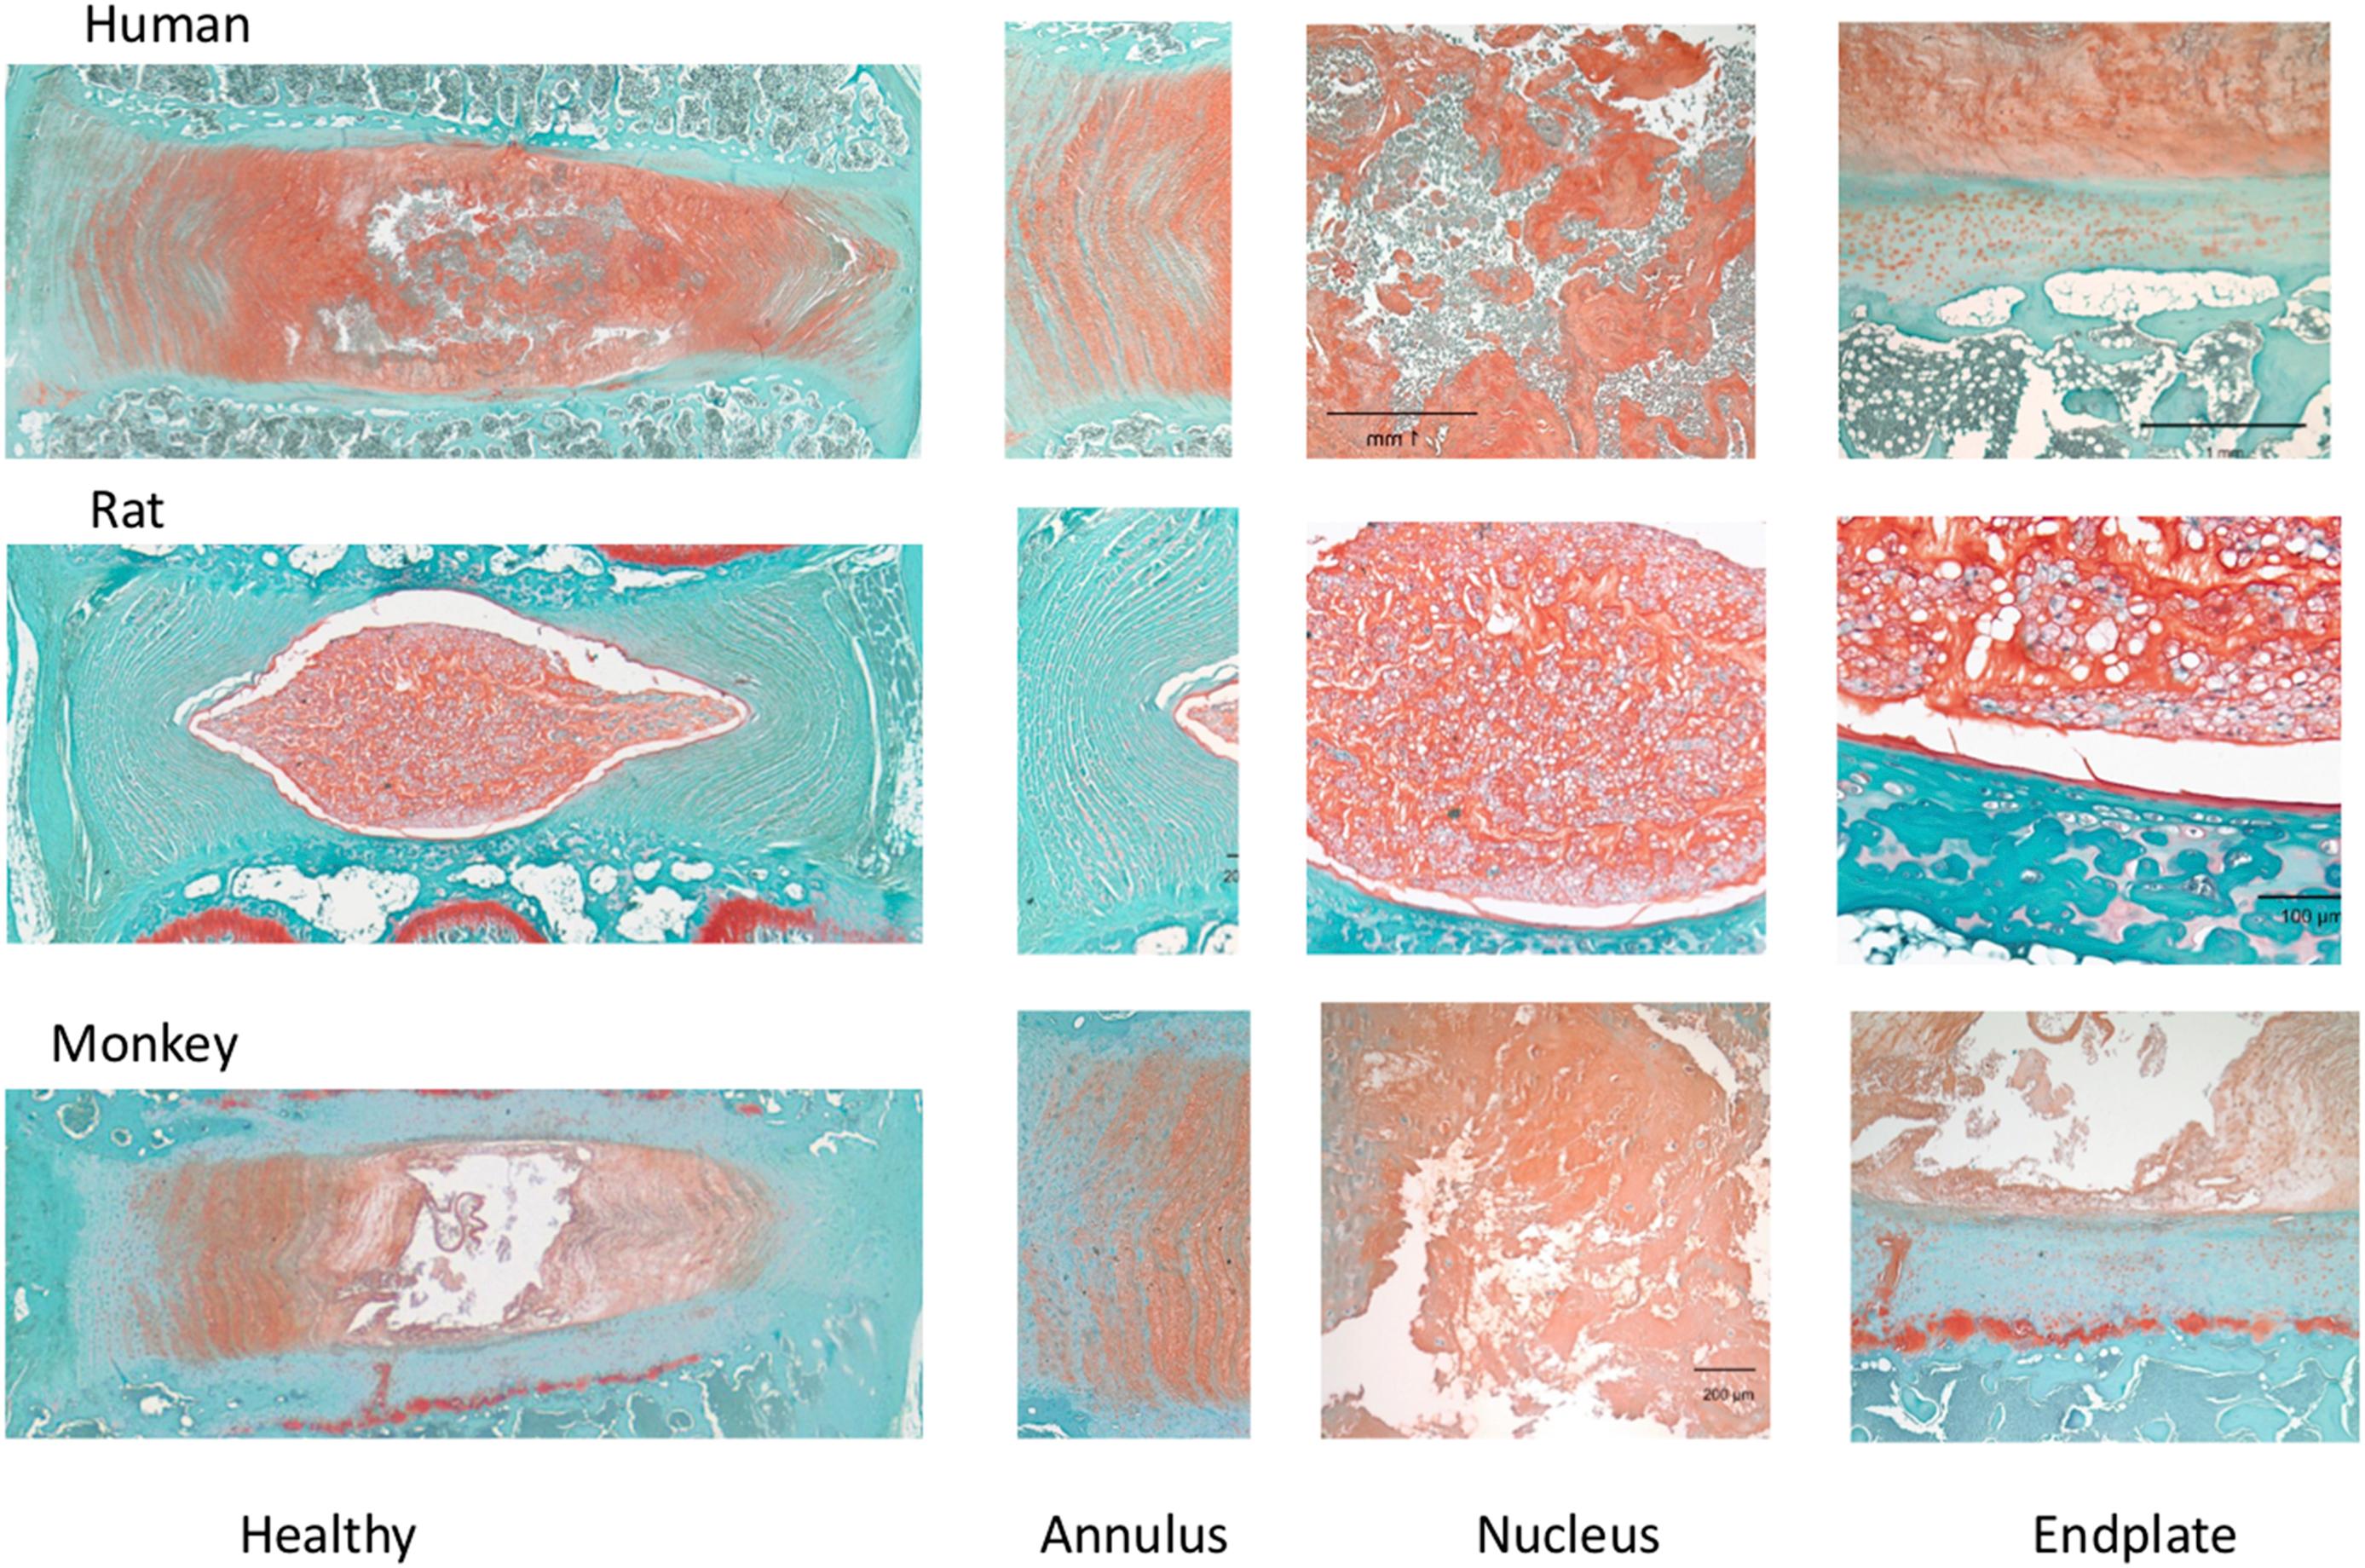 Figure 4.2, High power view of safranin-O stained disc sections highlighting the interface between the nucleus, cartilage endplate, and subchondral bone. Species differences in endplate cartilage thickness are apparent.